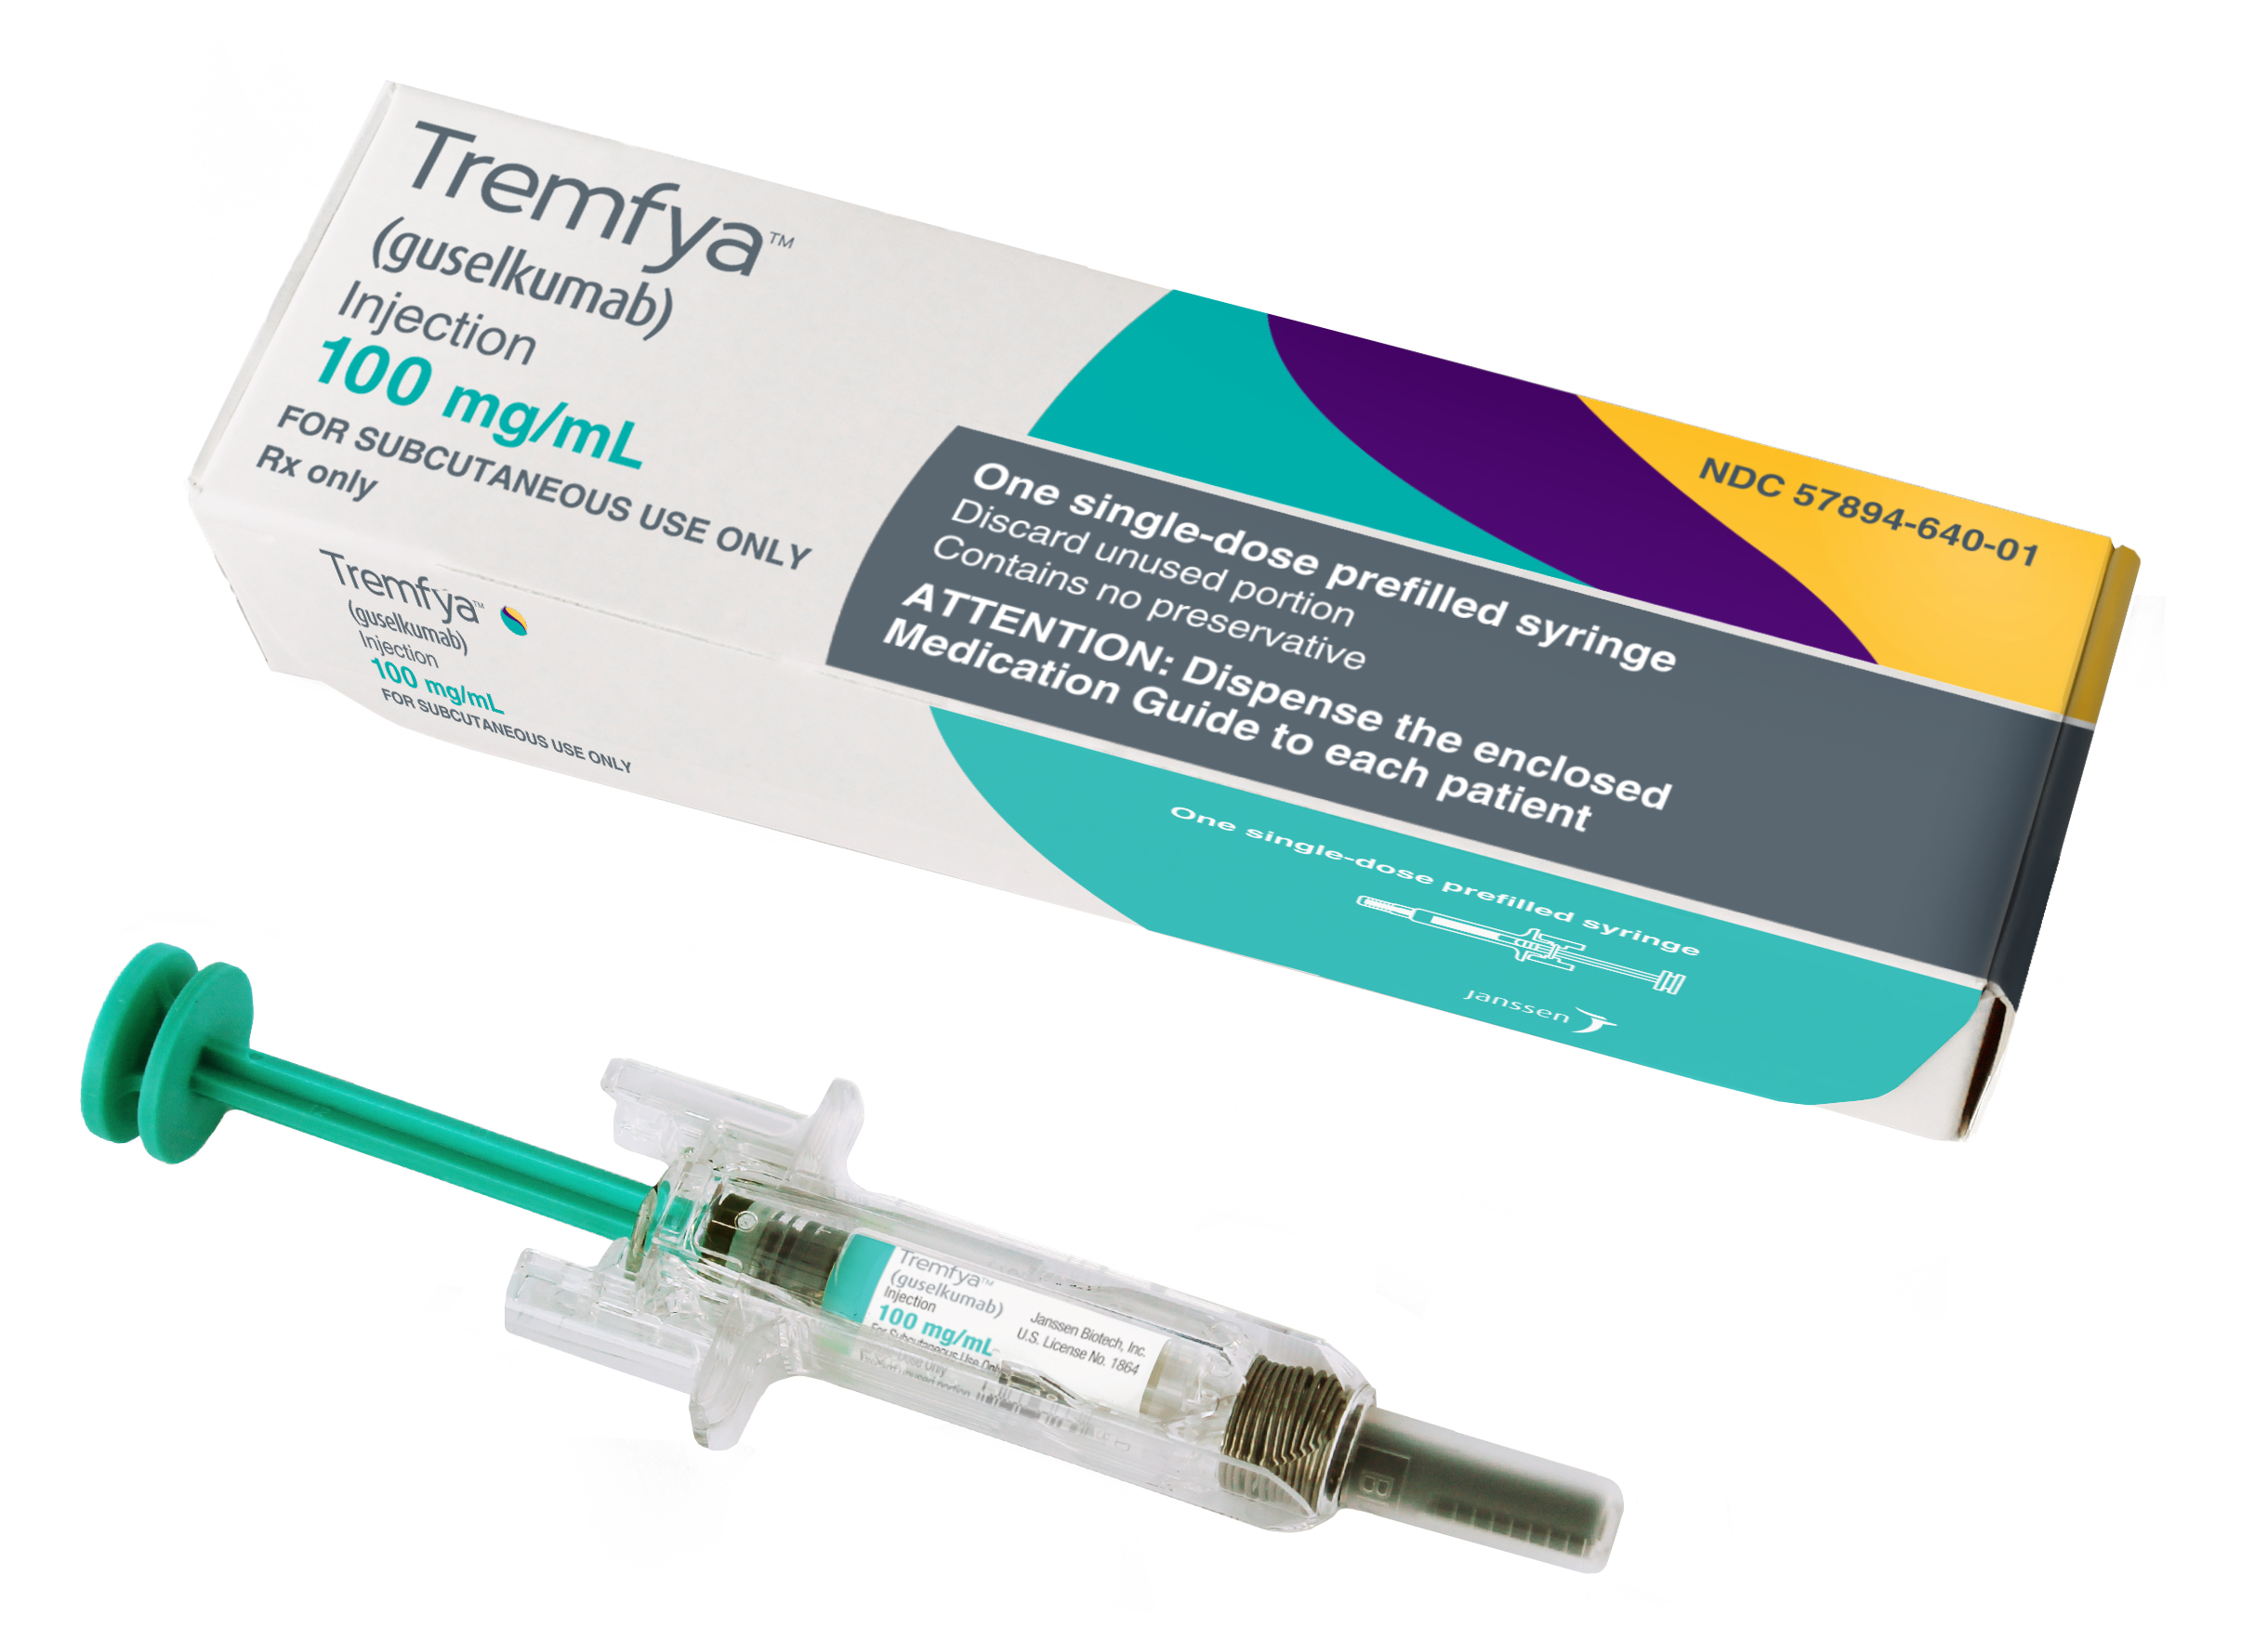 Tremfya Receives Approval for Treatment of Moderate to Severe Plaque